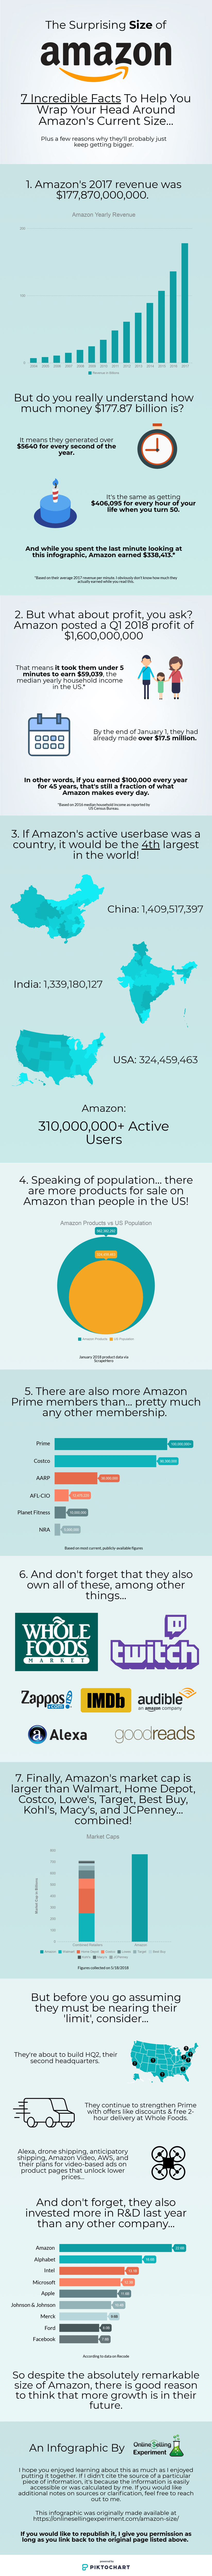 The Surprising Size of Amazon Infographic